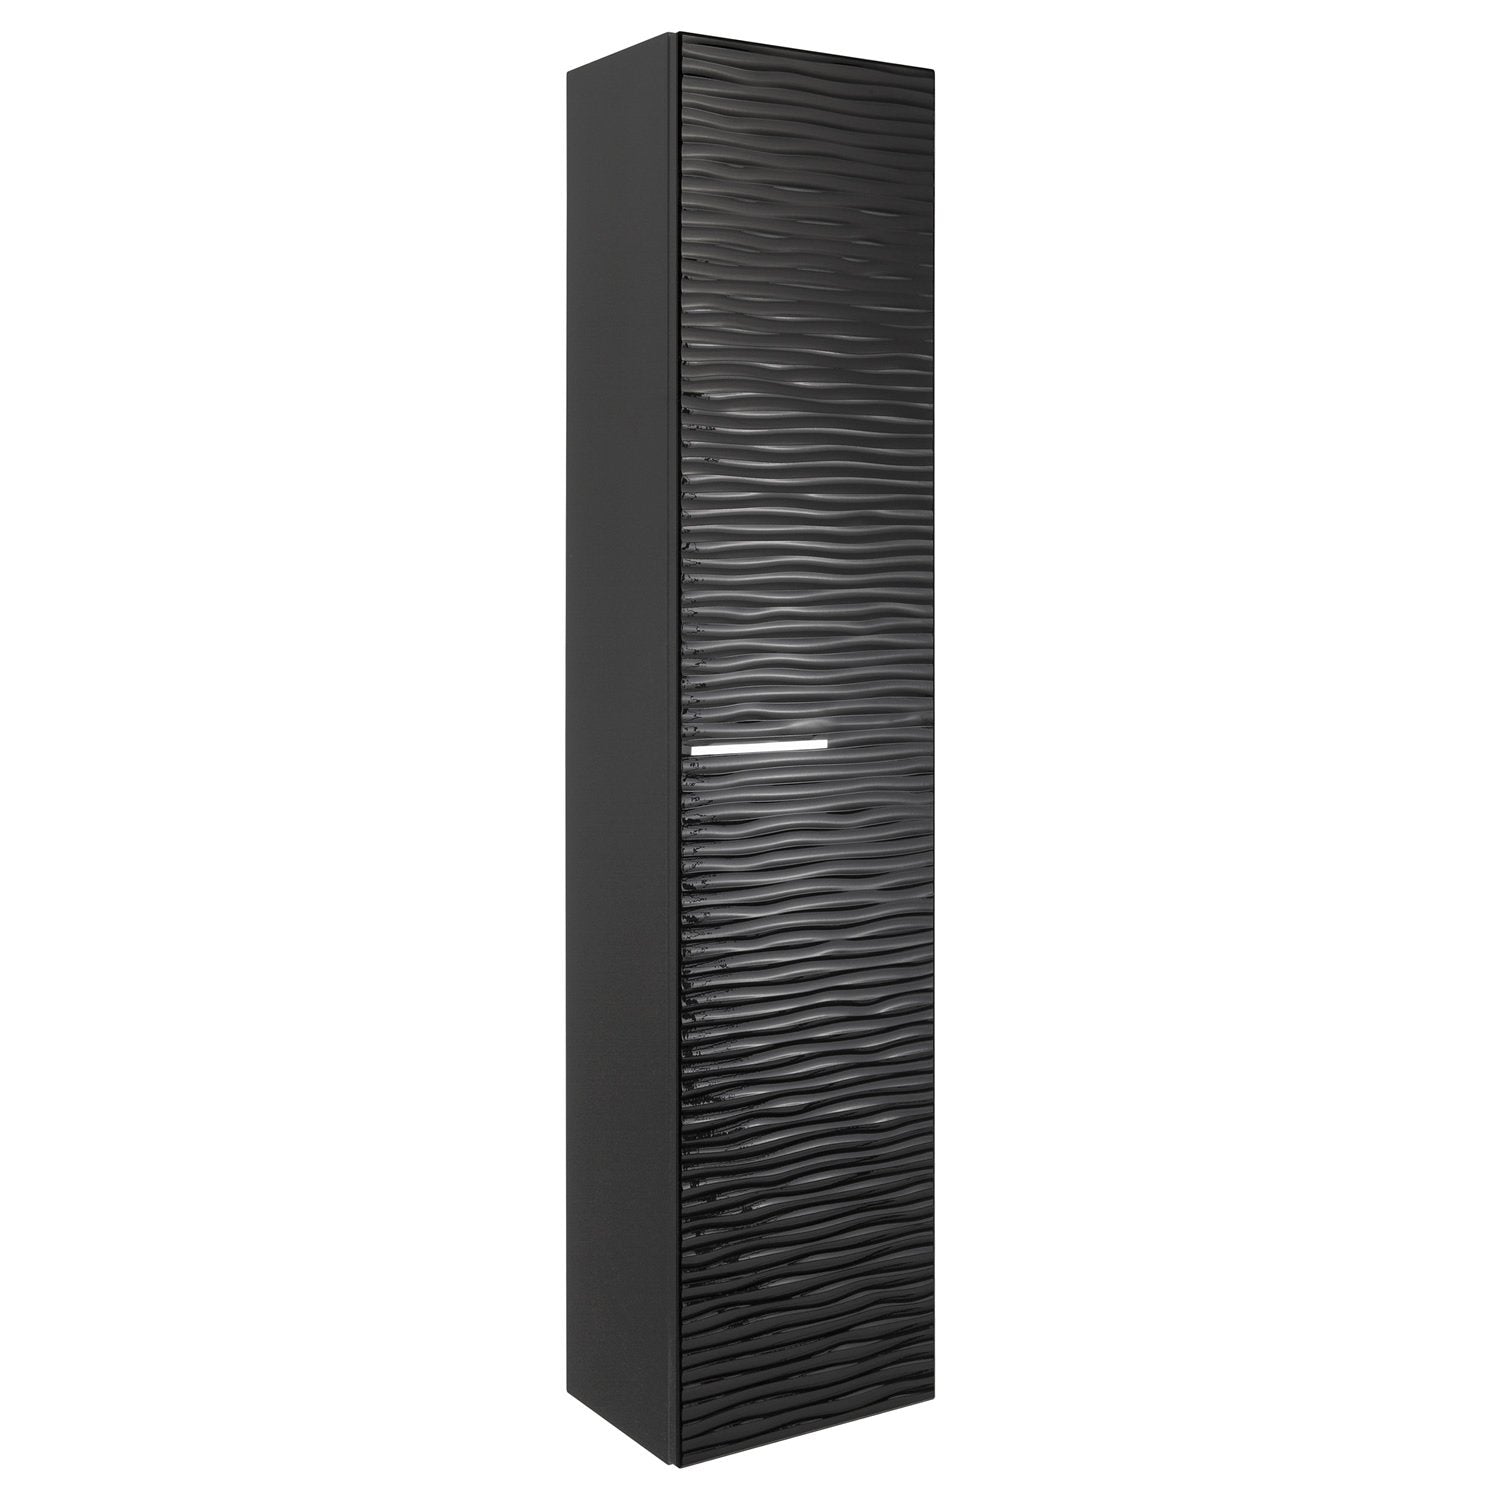 16" Tall Side Cabinet, Wall Mount, 1 Door whit Handle and Soft Close and Reversible Opening, Black, Serie Dune by VALENZUELA